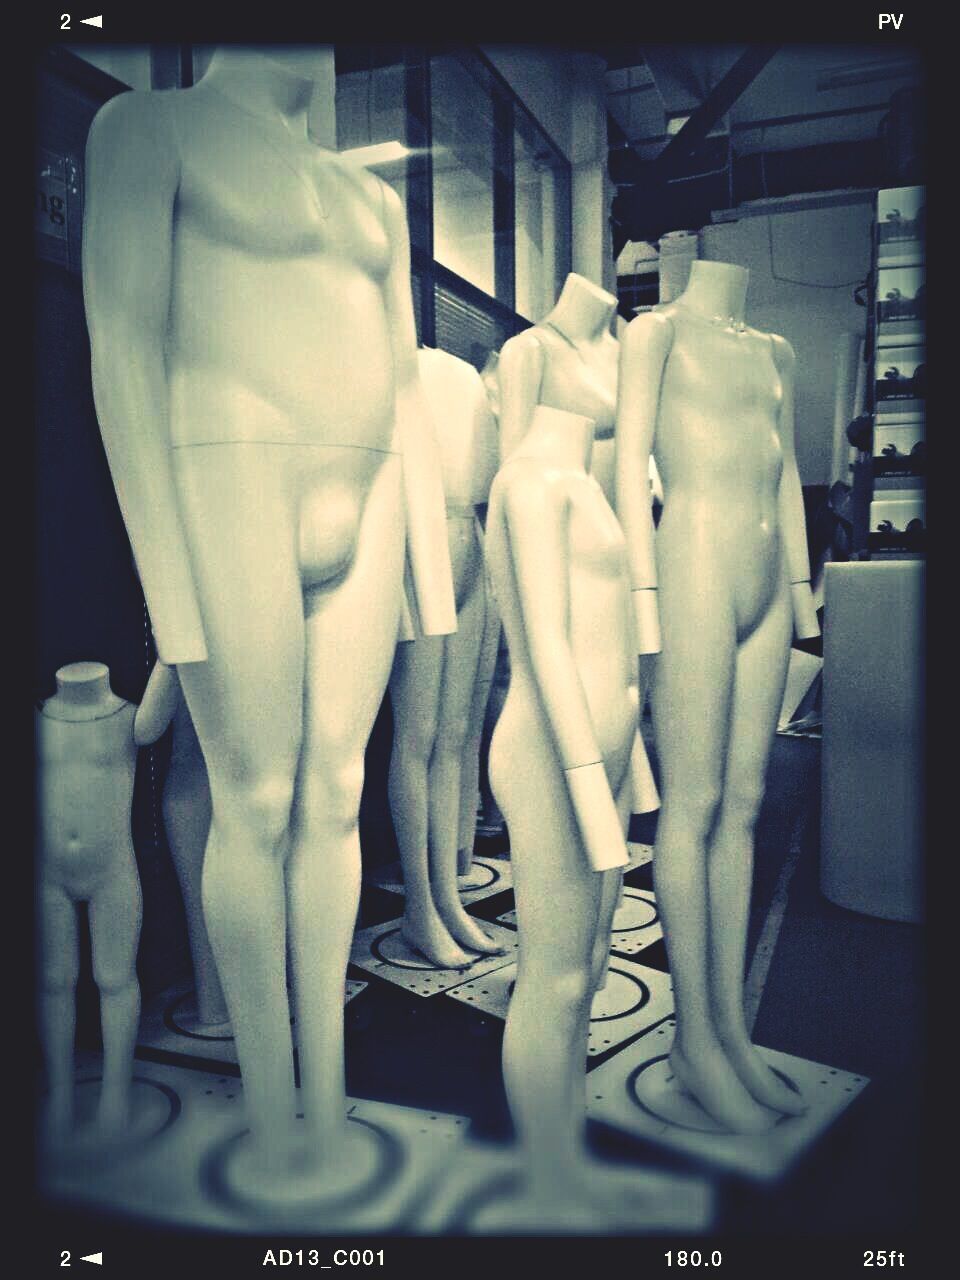 VIEW OF MANNEQUIN